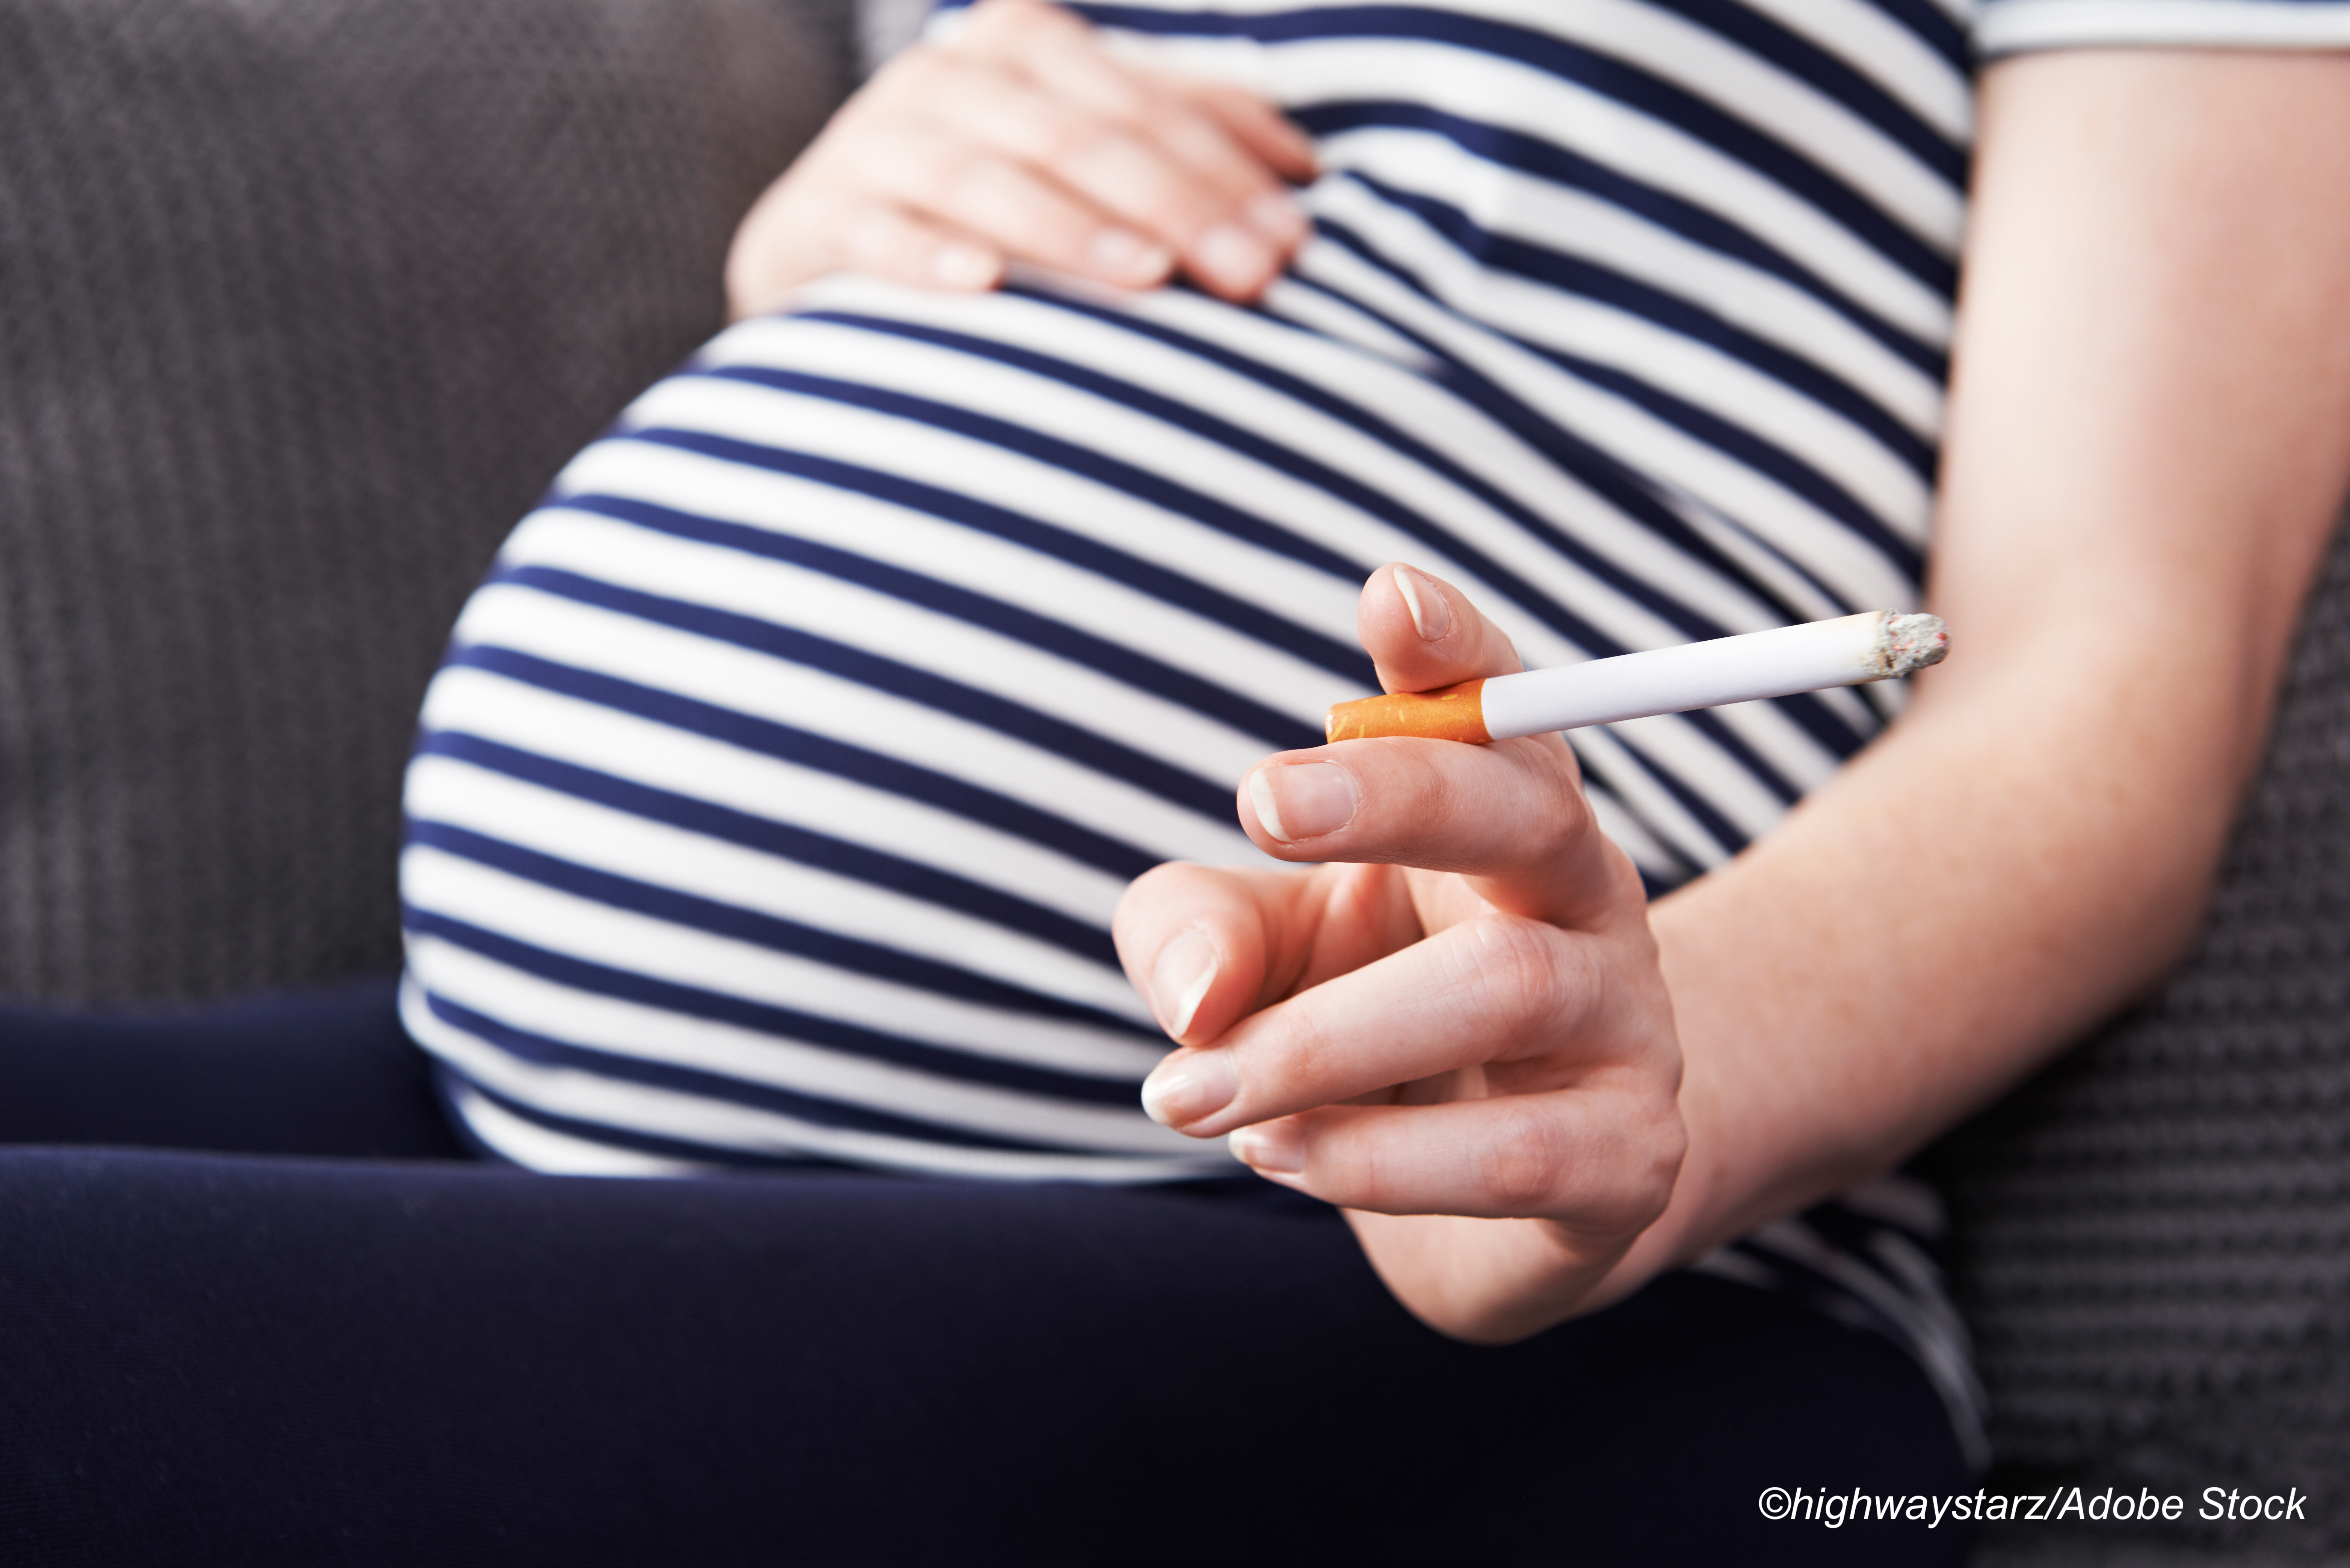 Want Expectant Moms to Quit Smoking? Pay Them